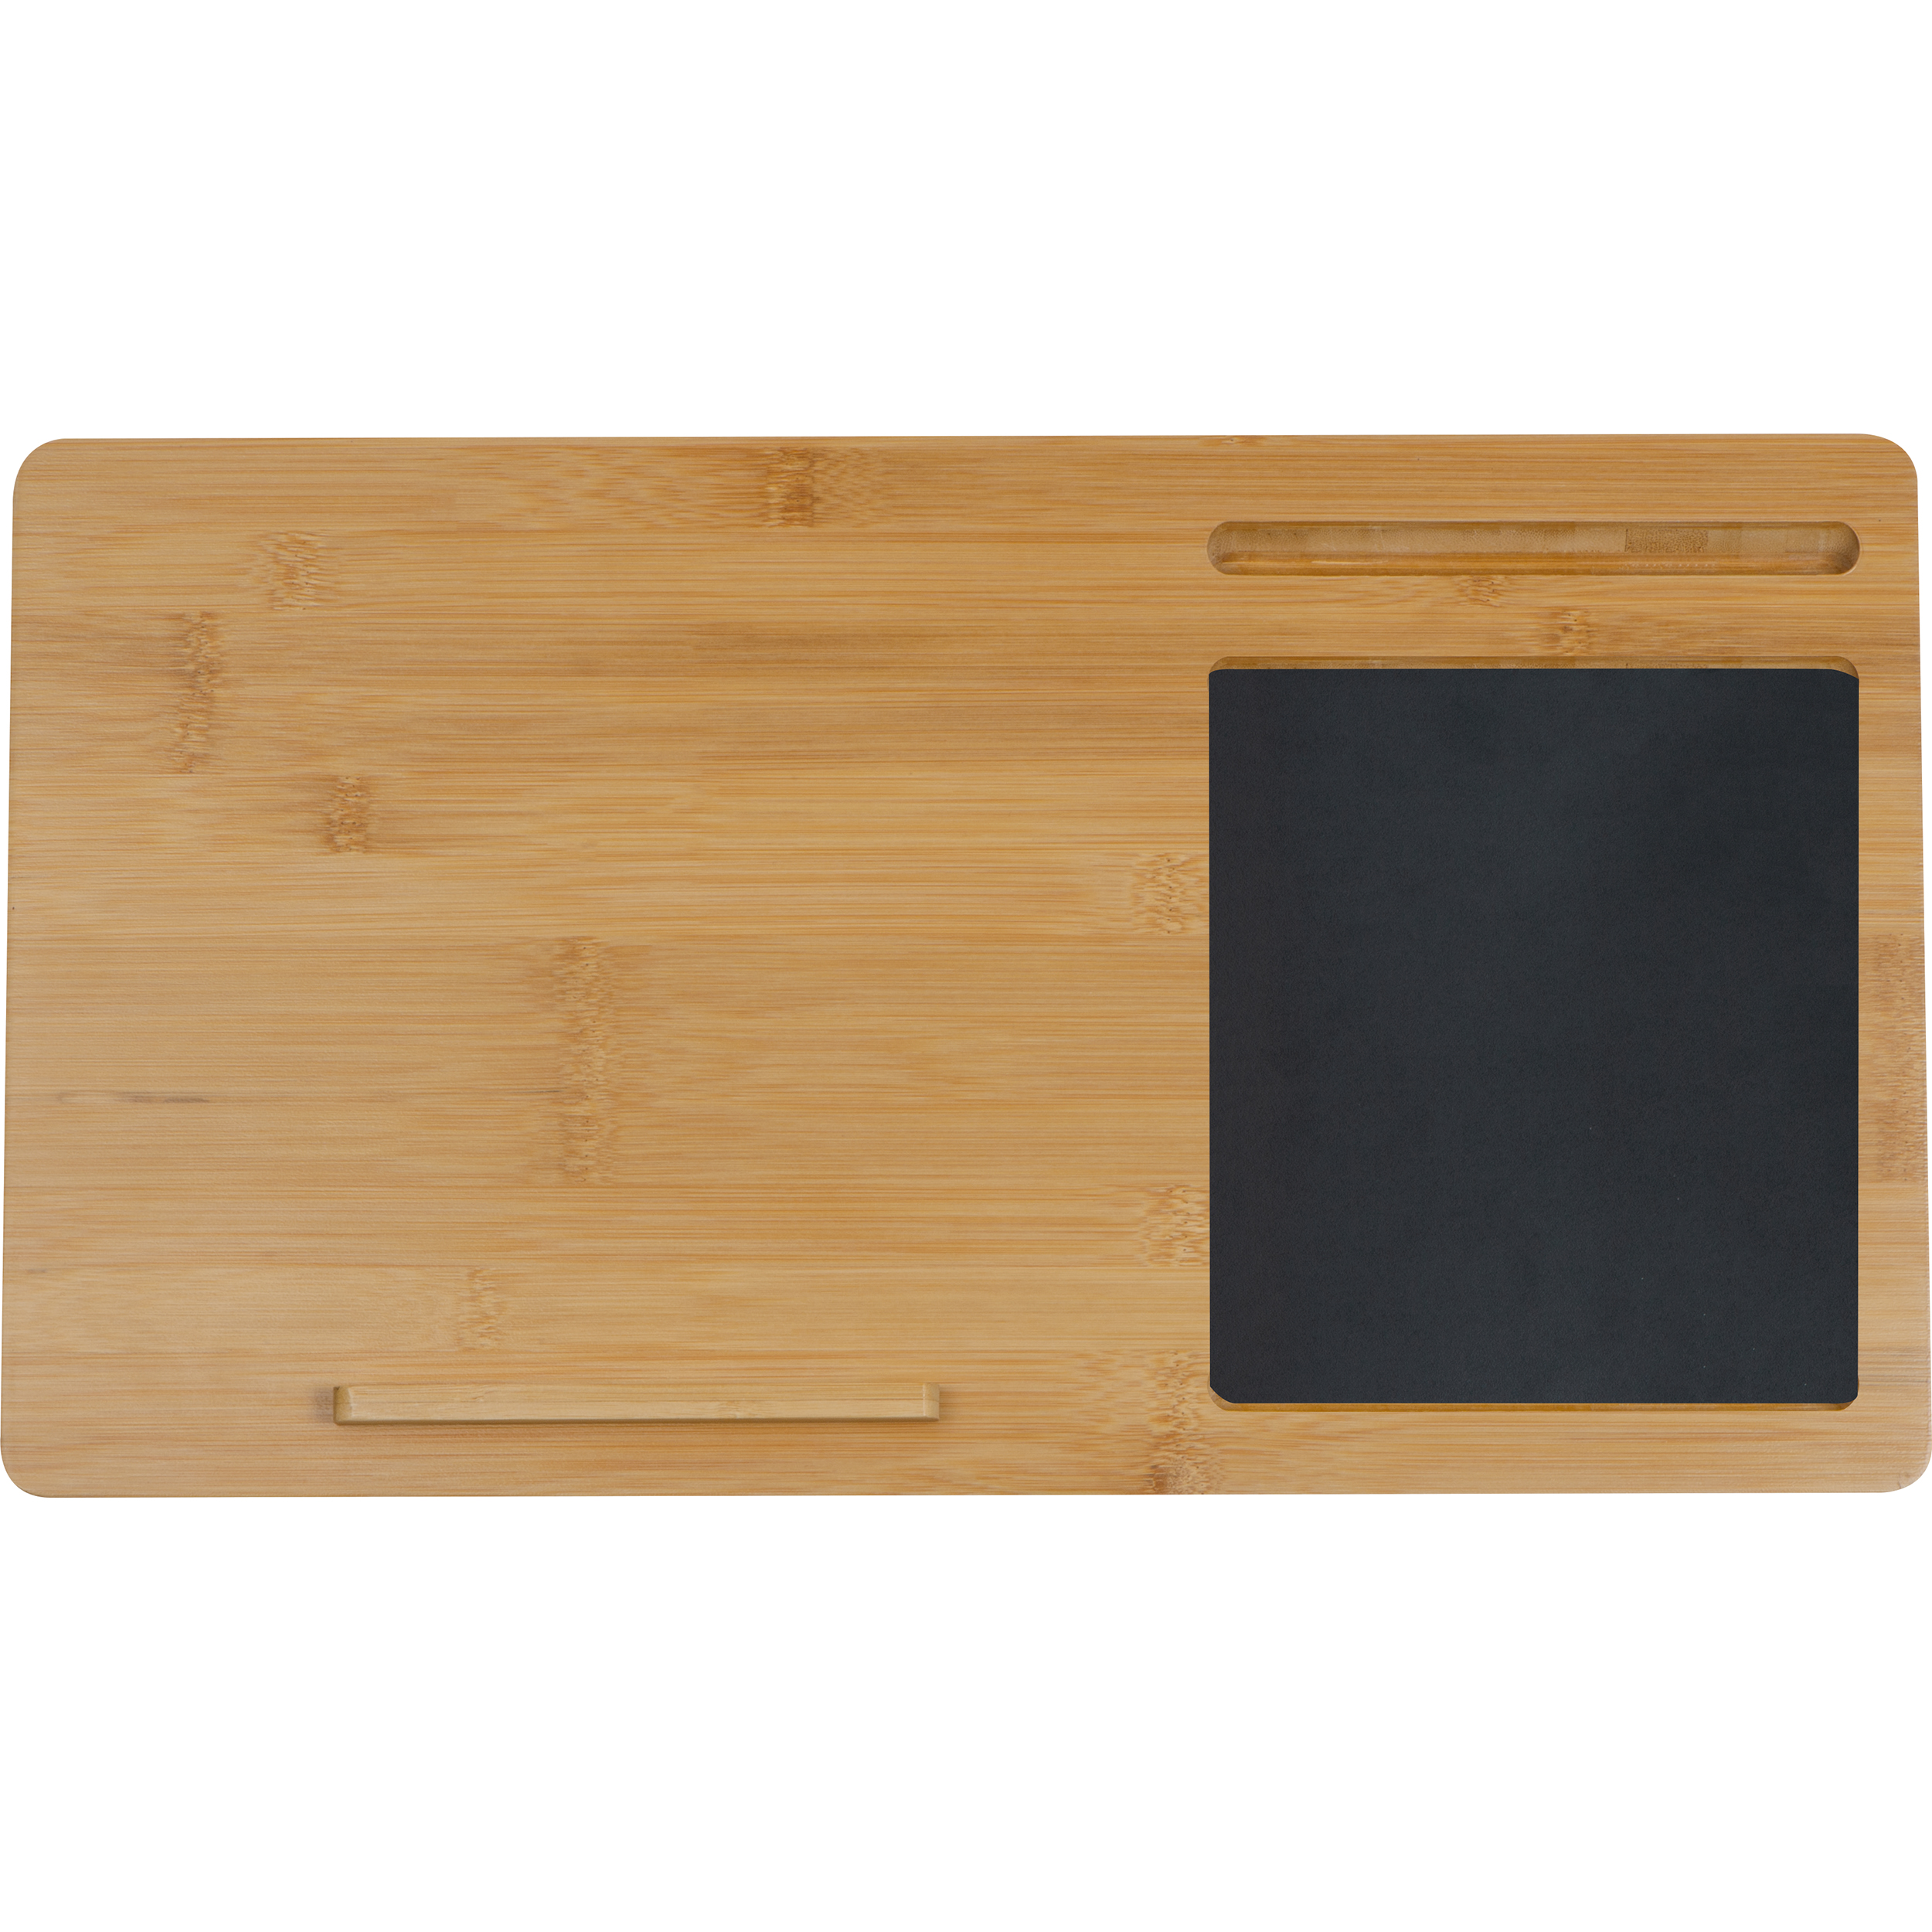 Laptop tray with mousepad and mobile phone holder